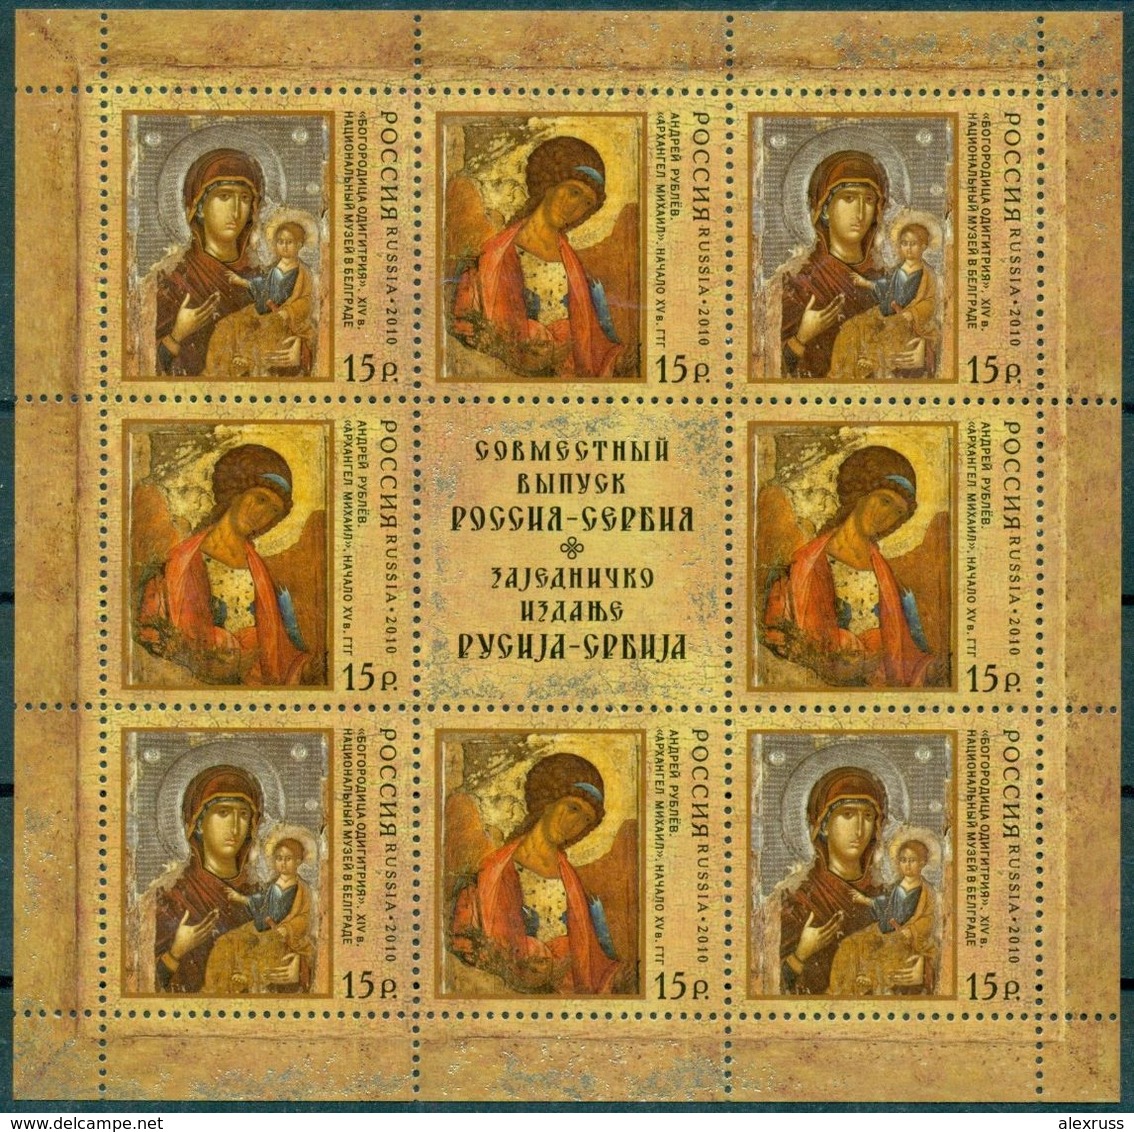 Russia 2010,Miniature Sheet Join Issue W/Serbia,Art Religious Icons Of Russia & Serbia,Scott # 7221,VF MNH** (OR-3) - Ongebruikt